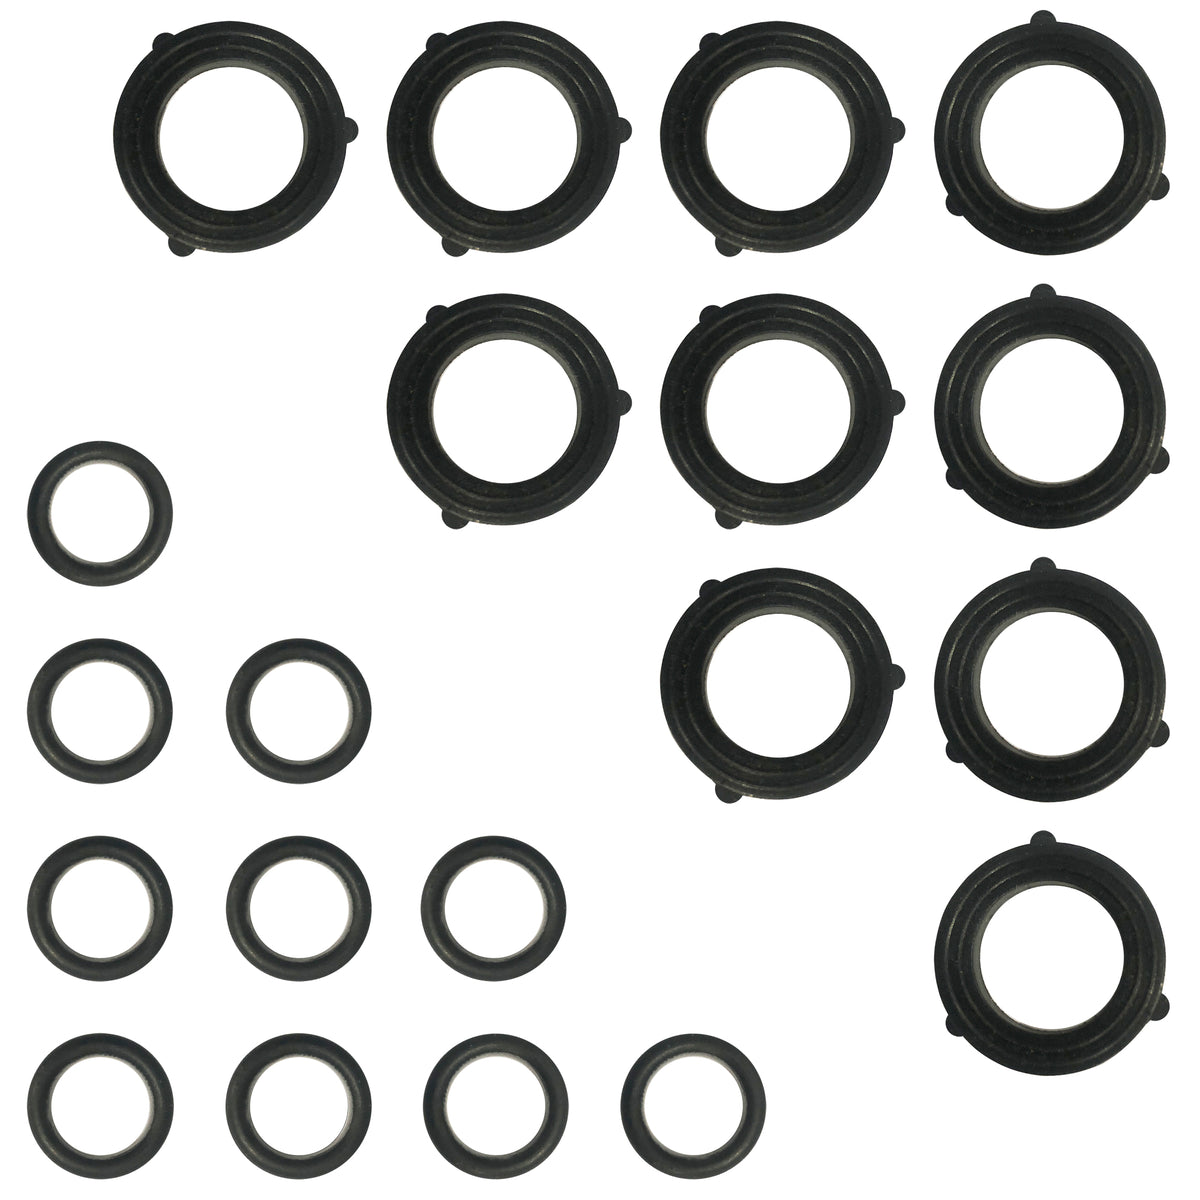 GORILLA EASY CONNECT O RING REPLACEMENT